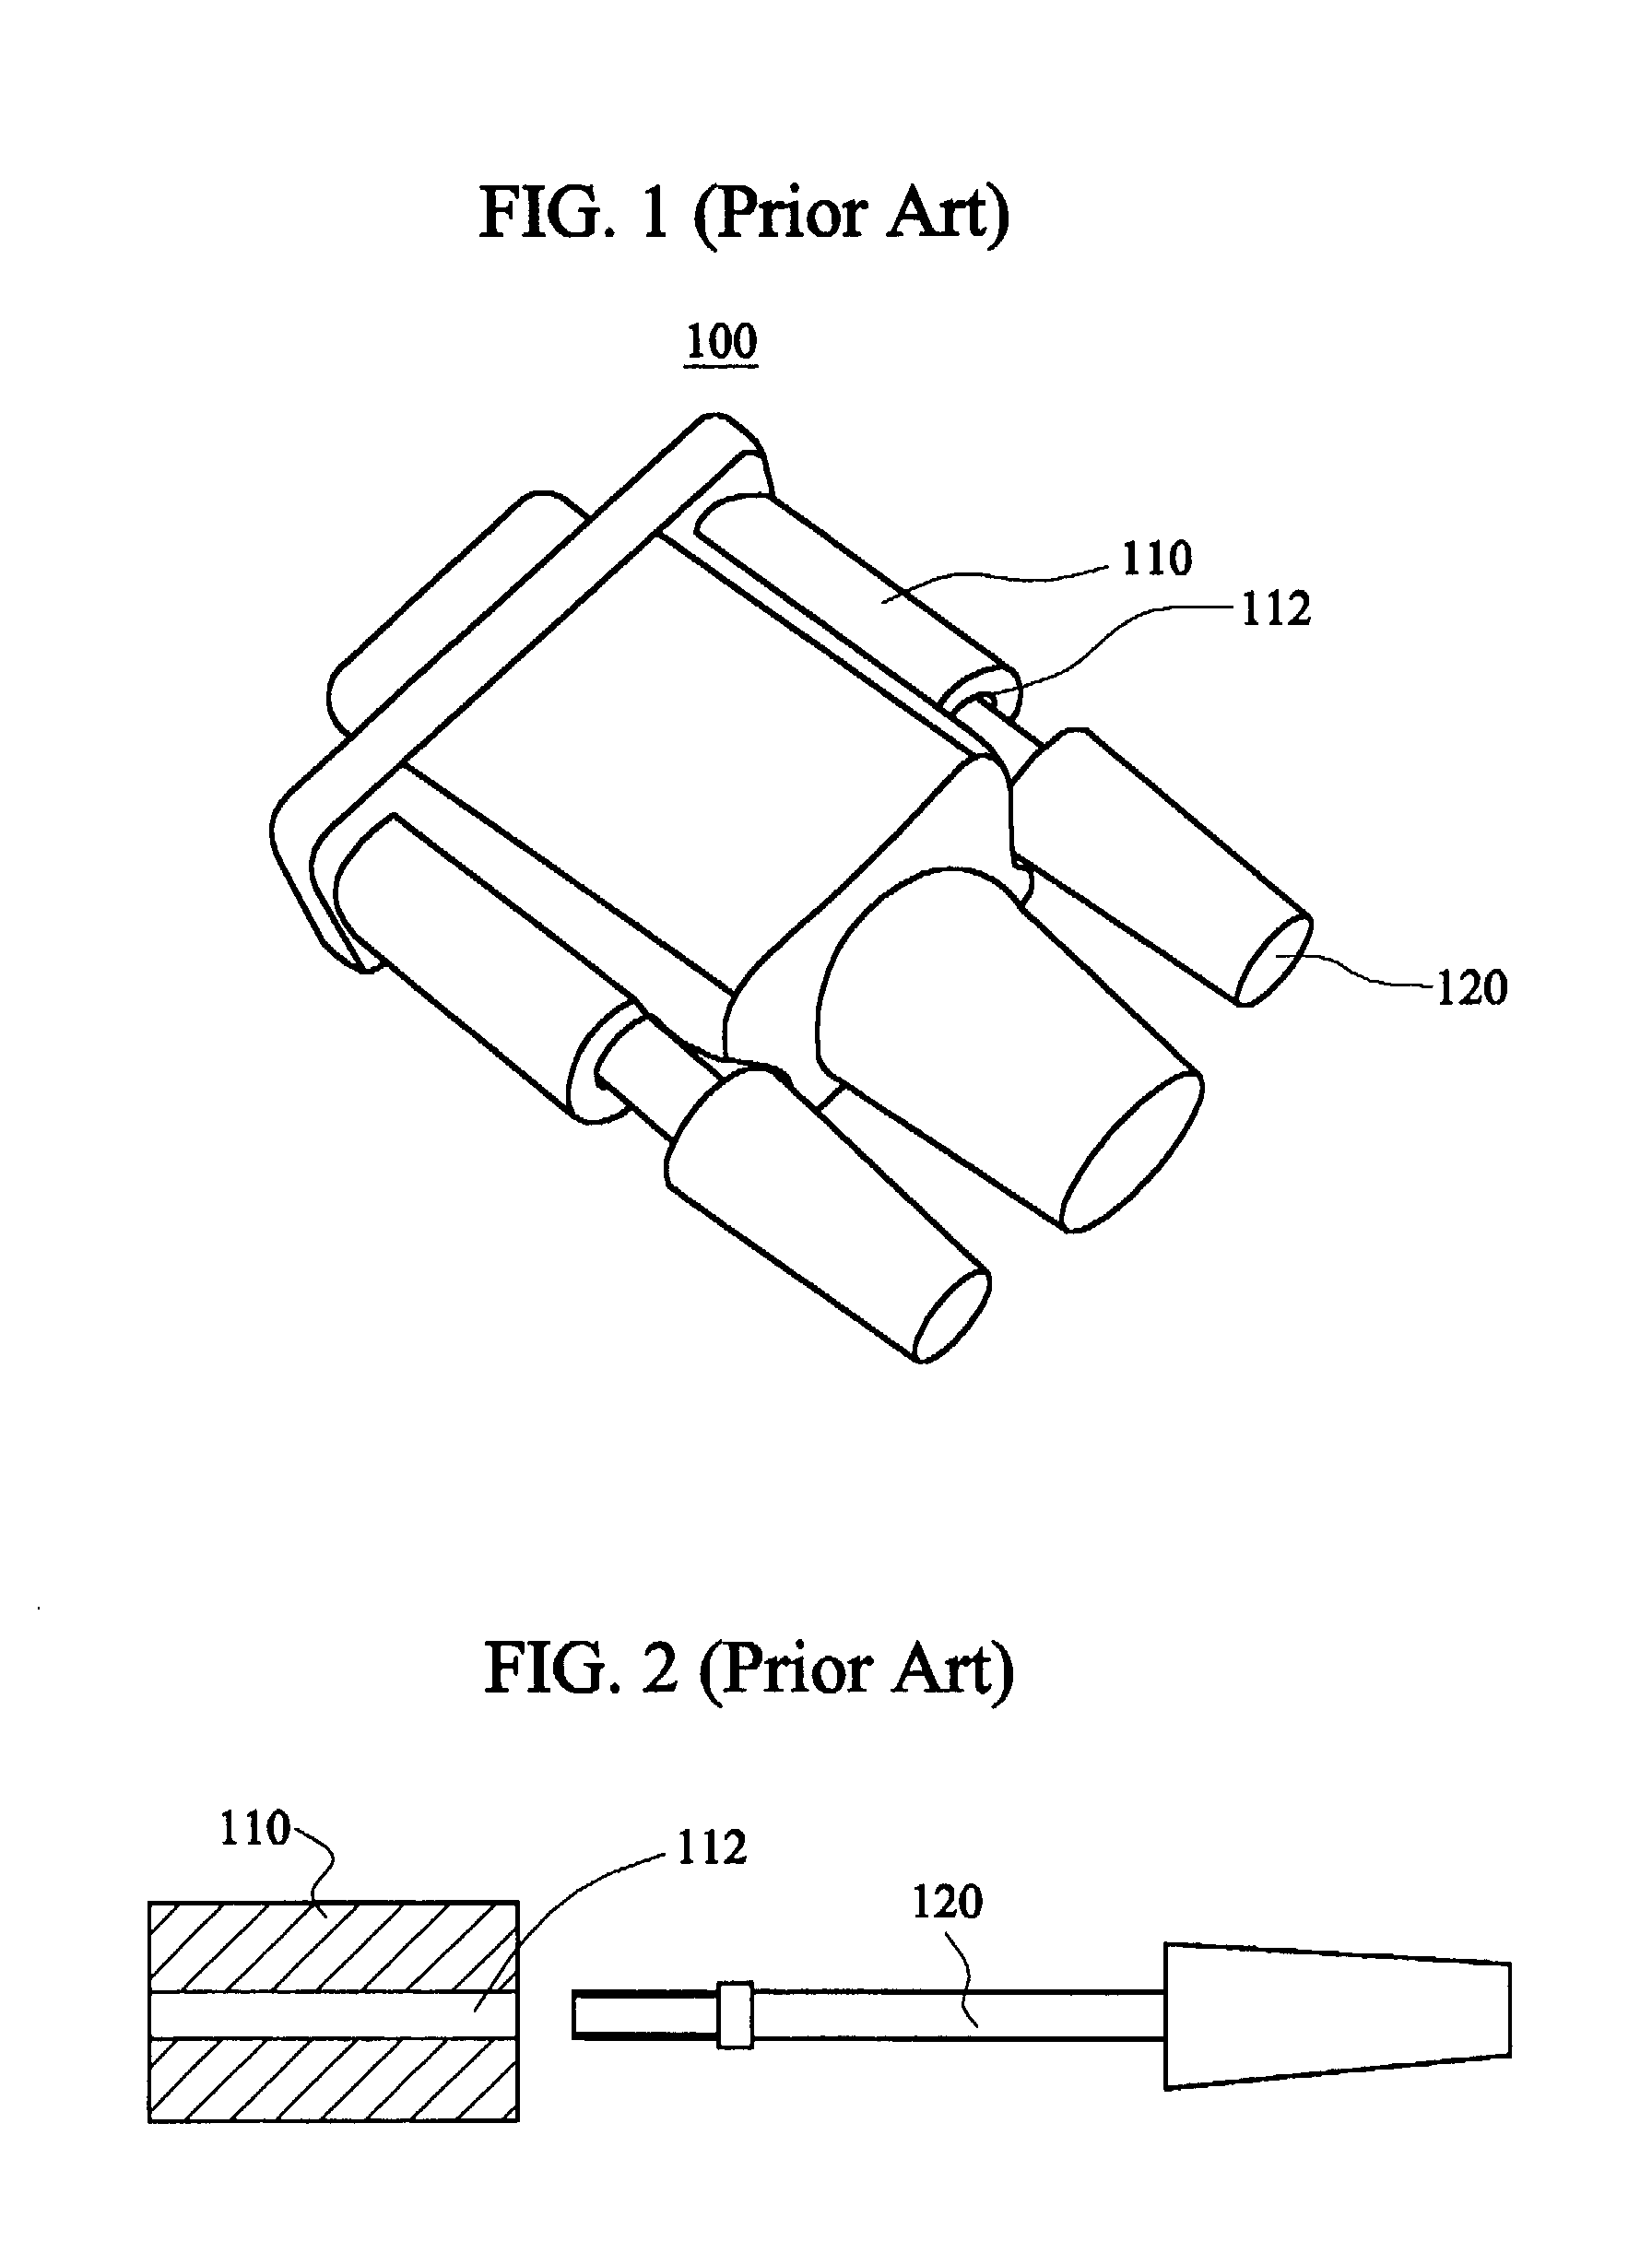 Electrical connector capable of interrupting an ESD path